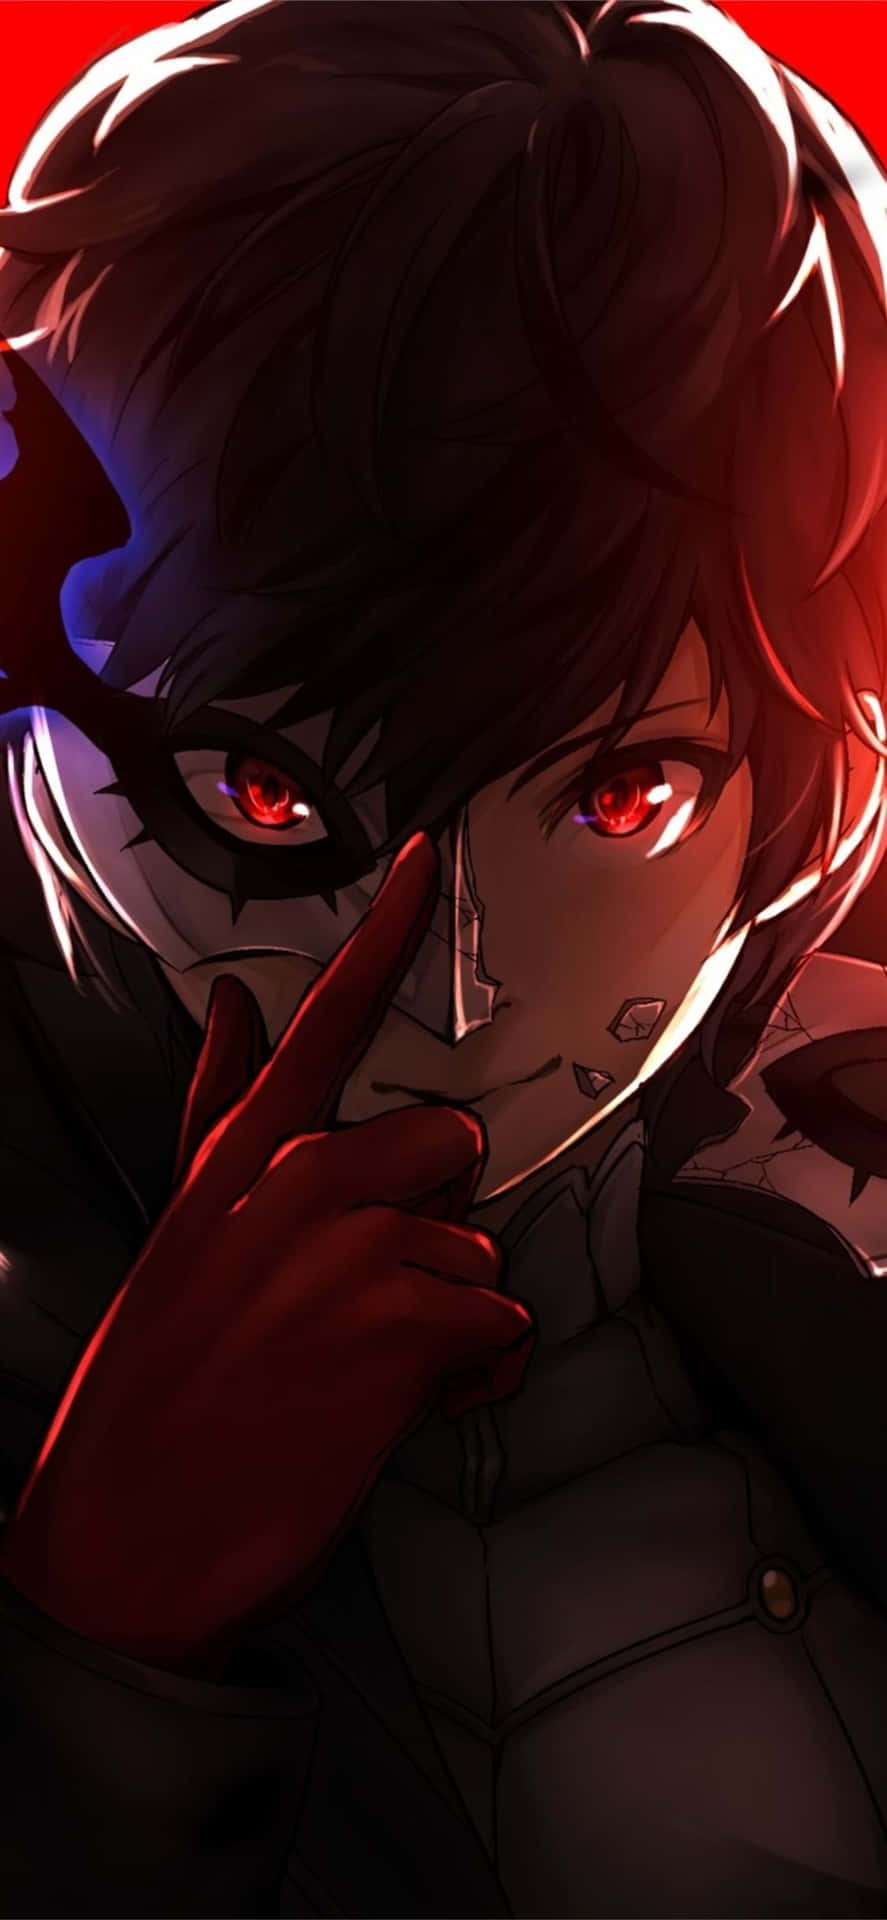 Outstanding Iphone Wallpaper featuring Persona 5 Wallpaper